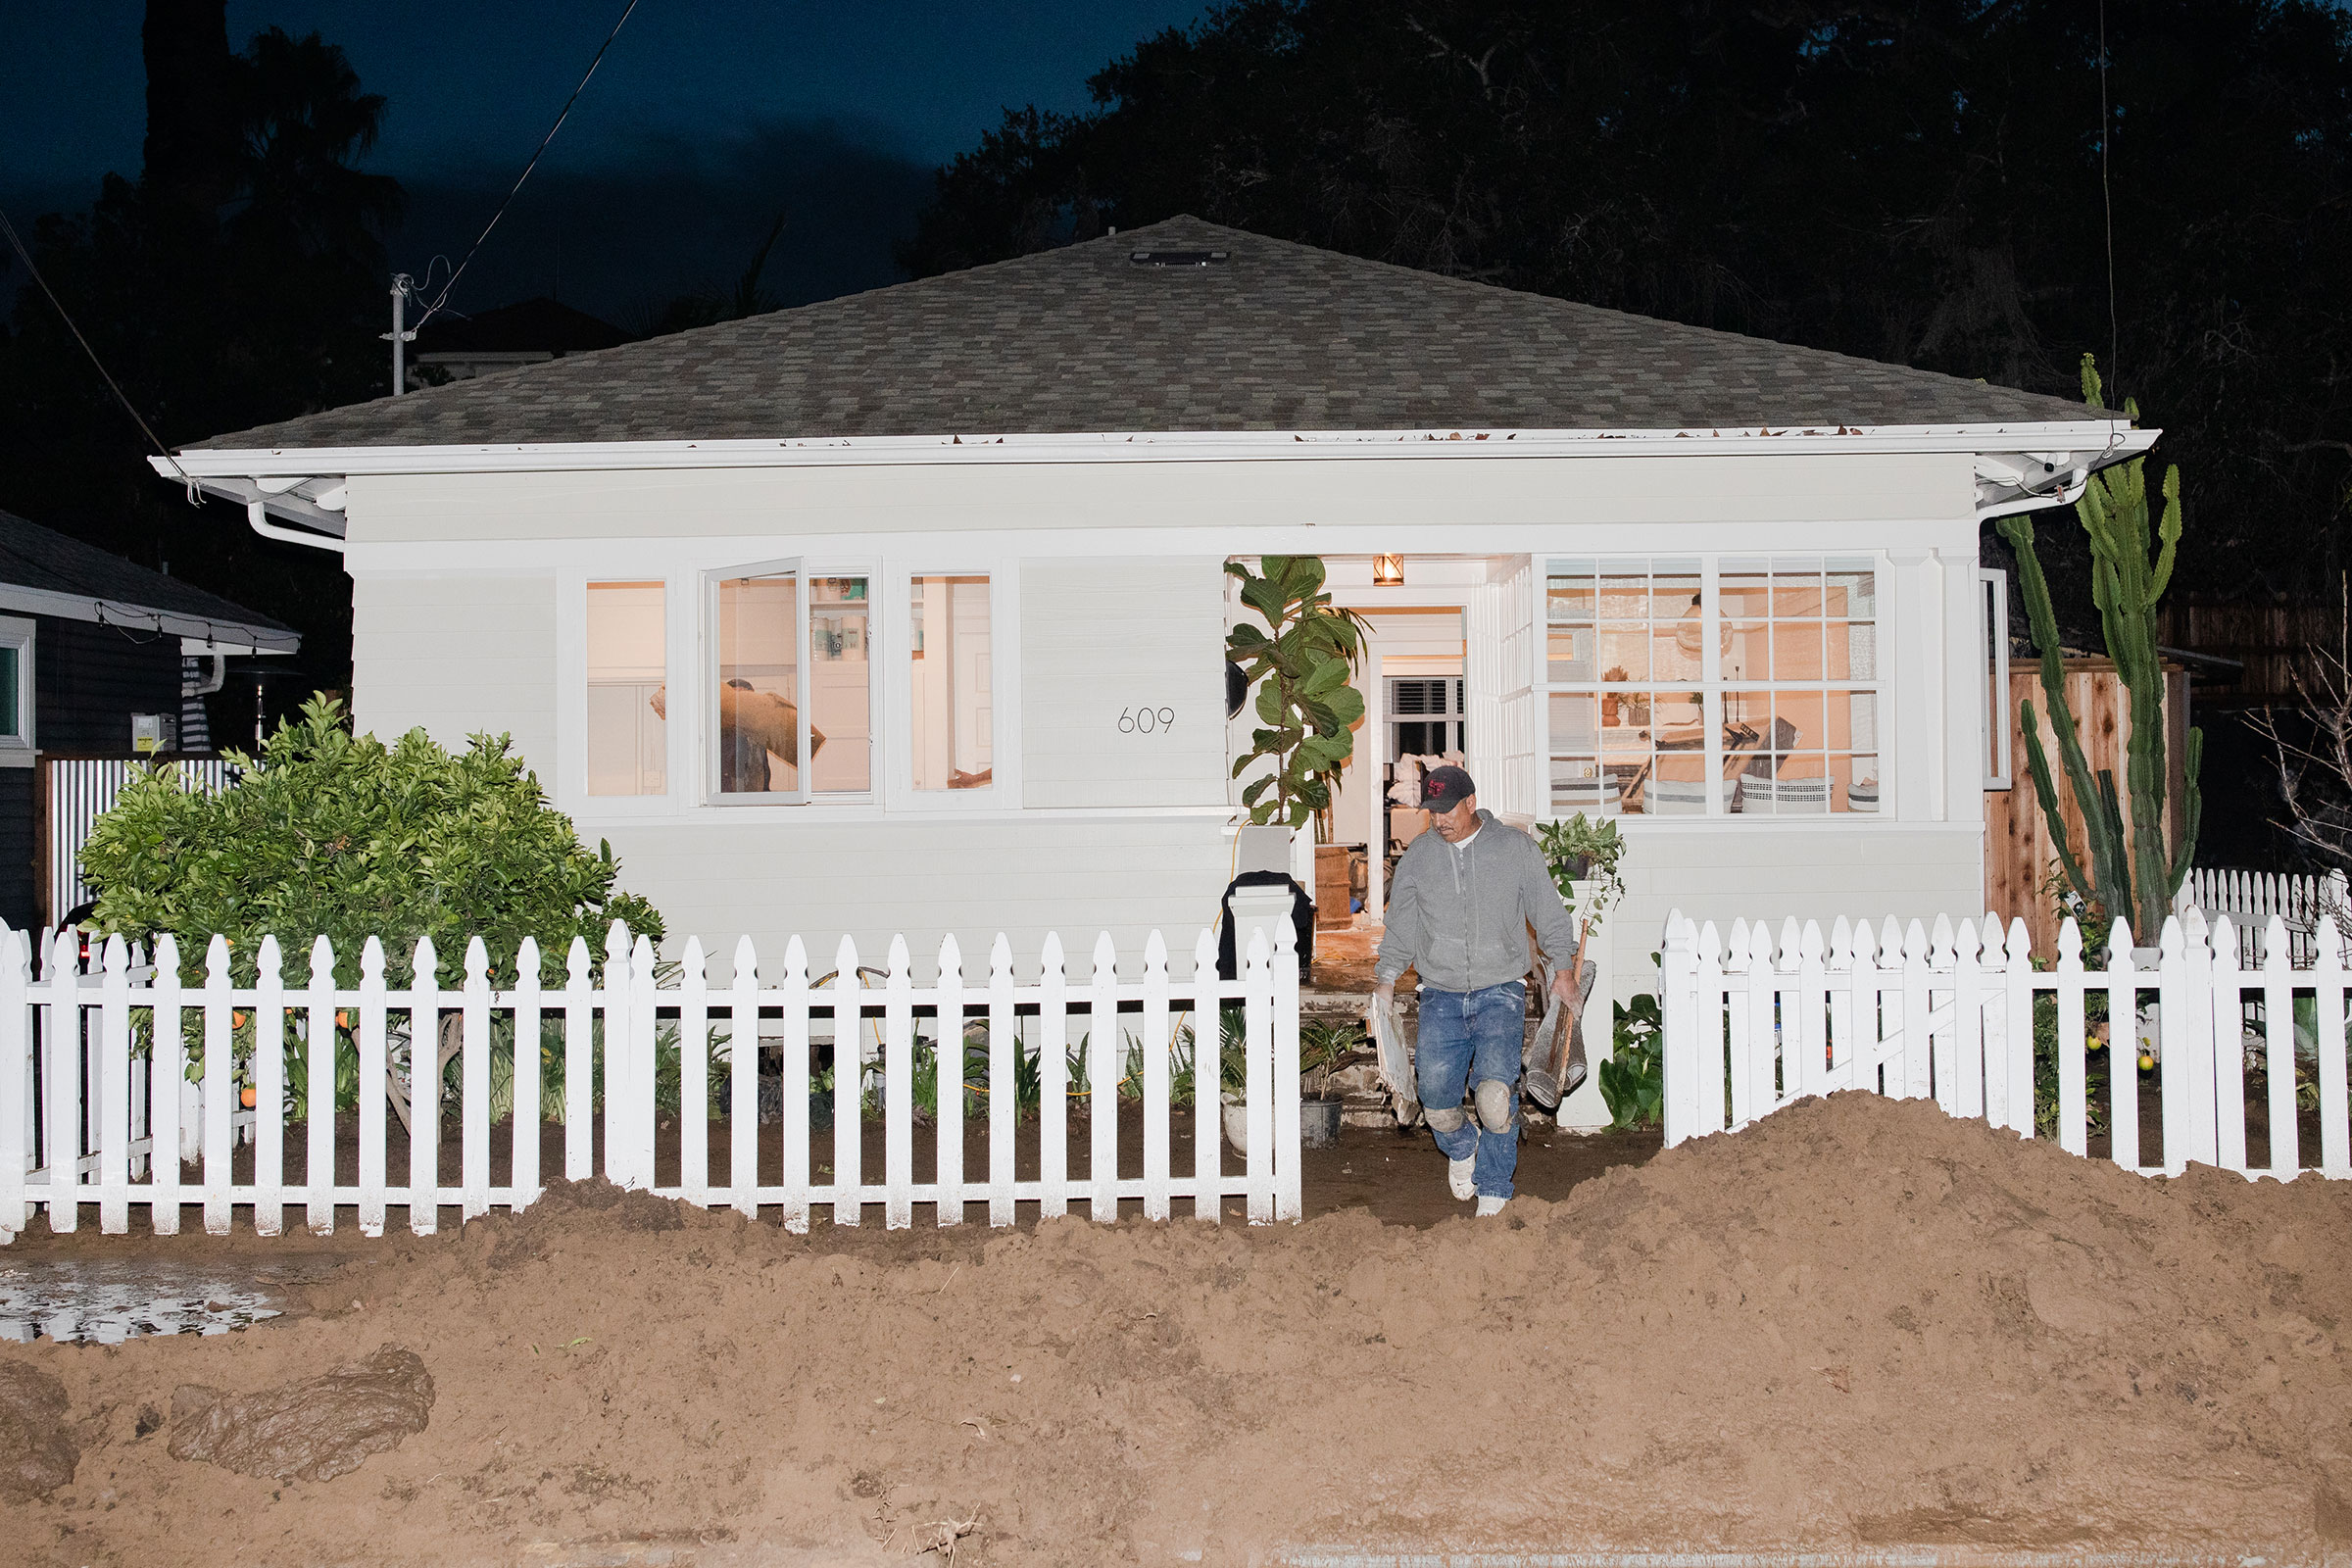 SANTA BARBARA, CALIFORNIA - January 10th, 2023: The cleanup of a damaged house in the aftermath of flooding on Bath Street in Santa Barbara on Tuesday.CREDIT: Alex Welsh for TIME